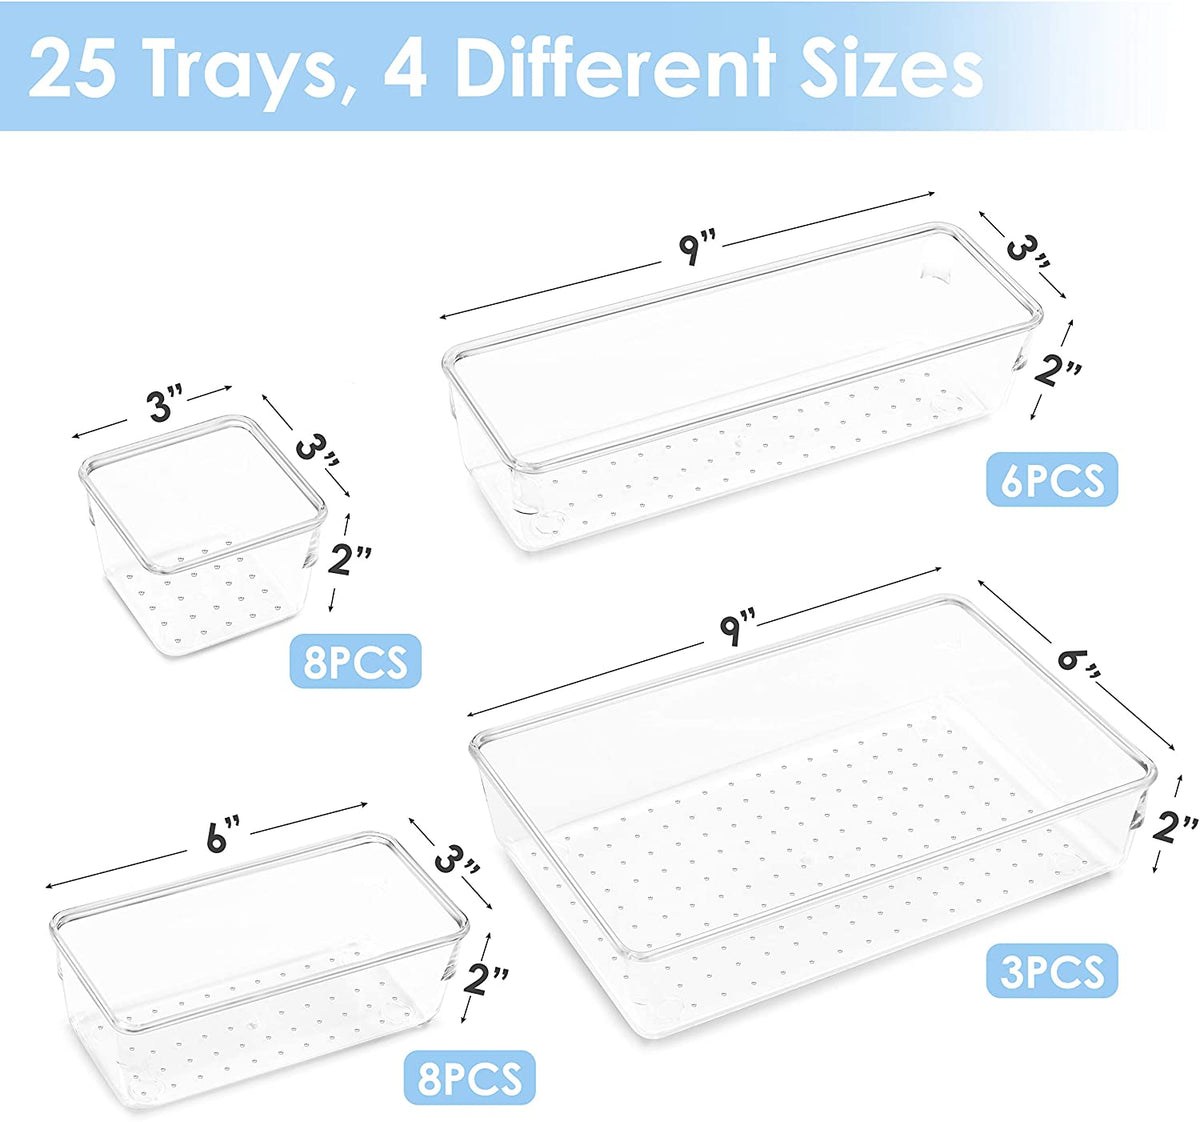 Dropship 25Pcs Clear Plastic Drawer Organizers Set 4 Sizes Desk Drawer  Dividers Trays Storage Bins to Sell Online at a Lower Price